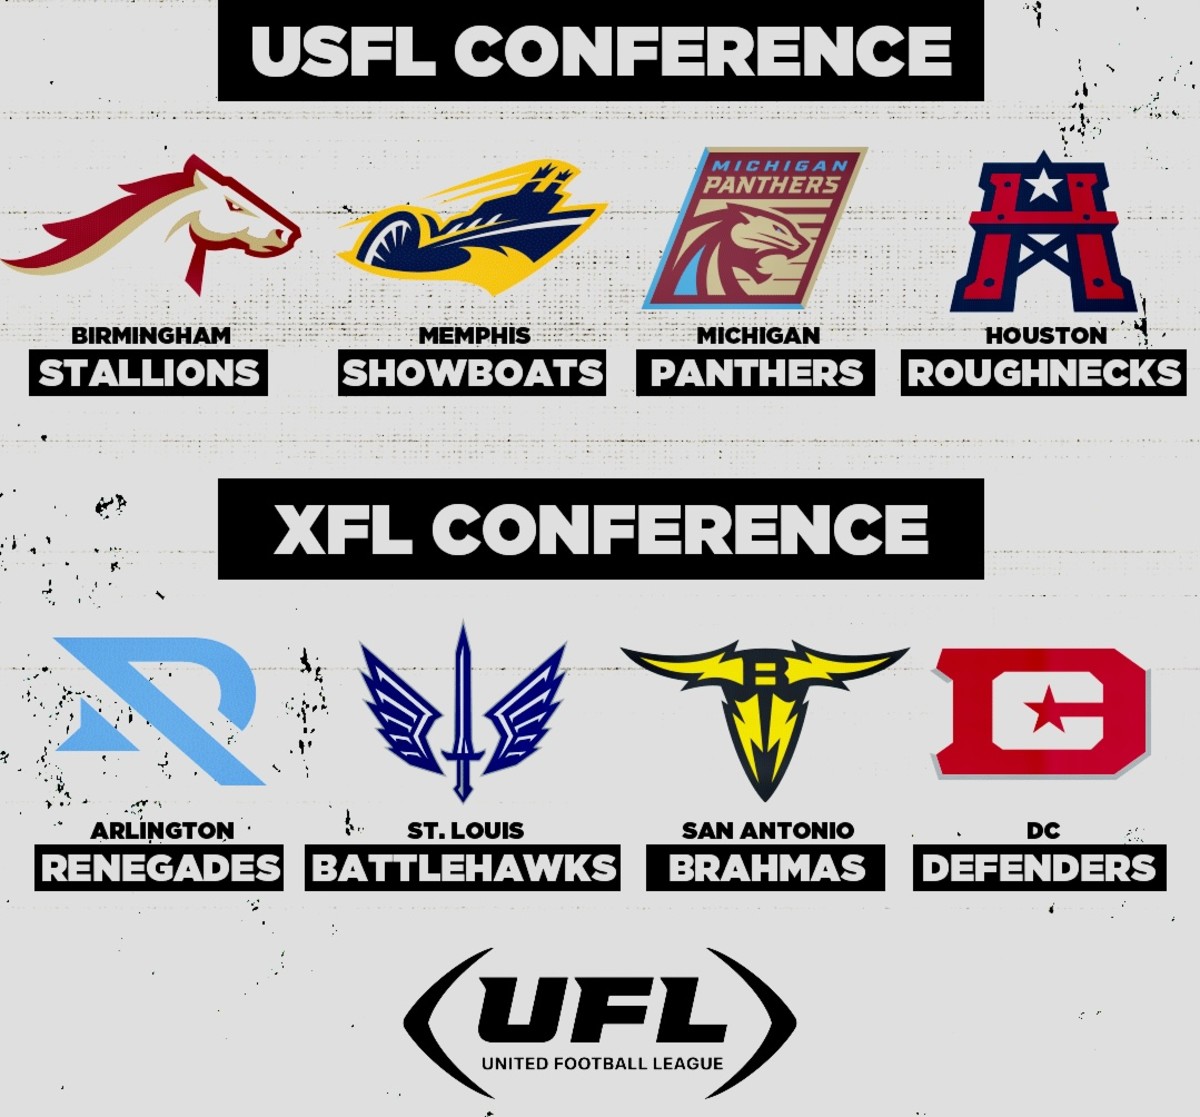 The UFL has paired teams from its USFL Conference with XFL Conference clubs in the league's inaugural training camp.